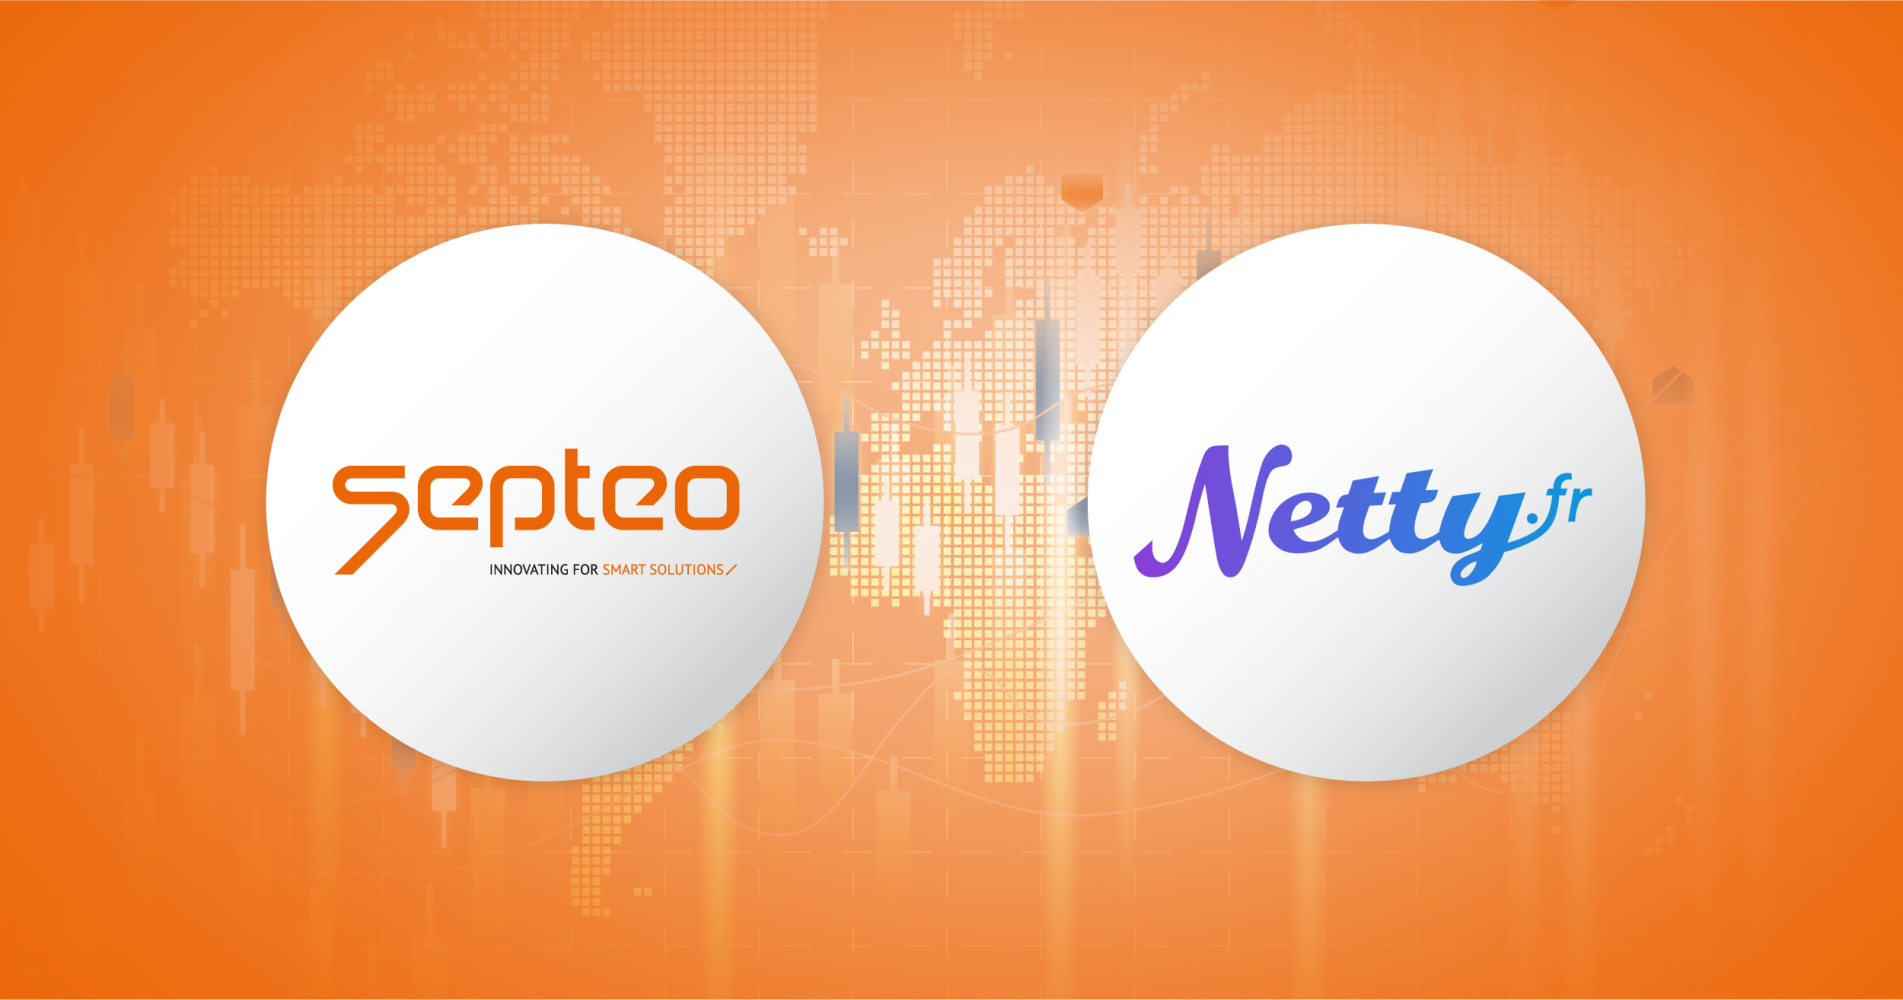 Septeo strengthens its real estate division with the integration of Netty, “The all-in-one real estate solution”